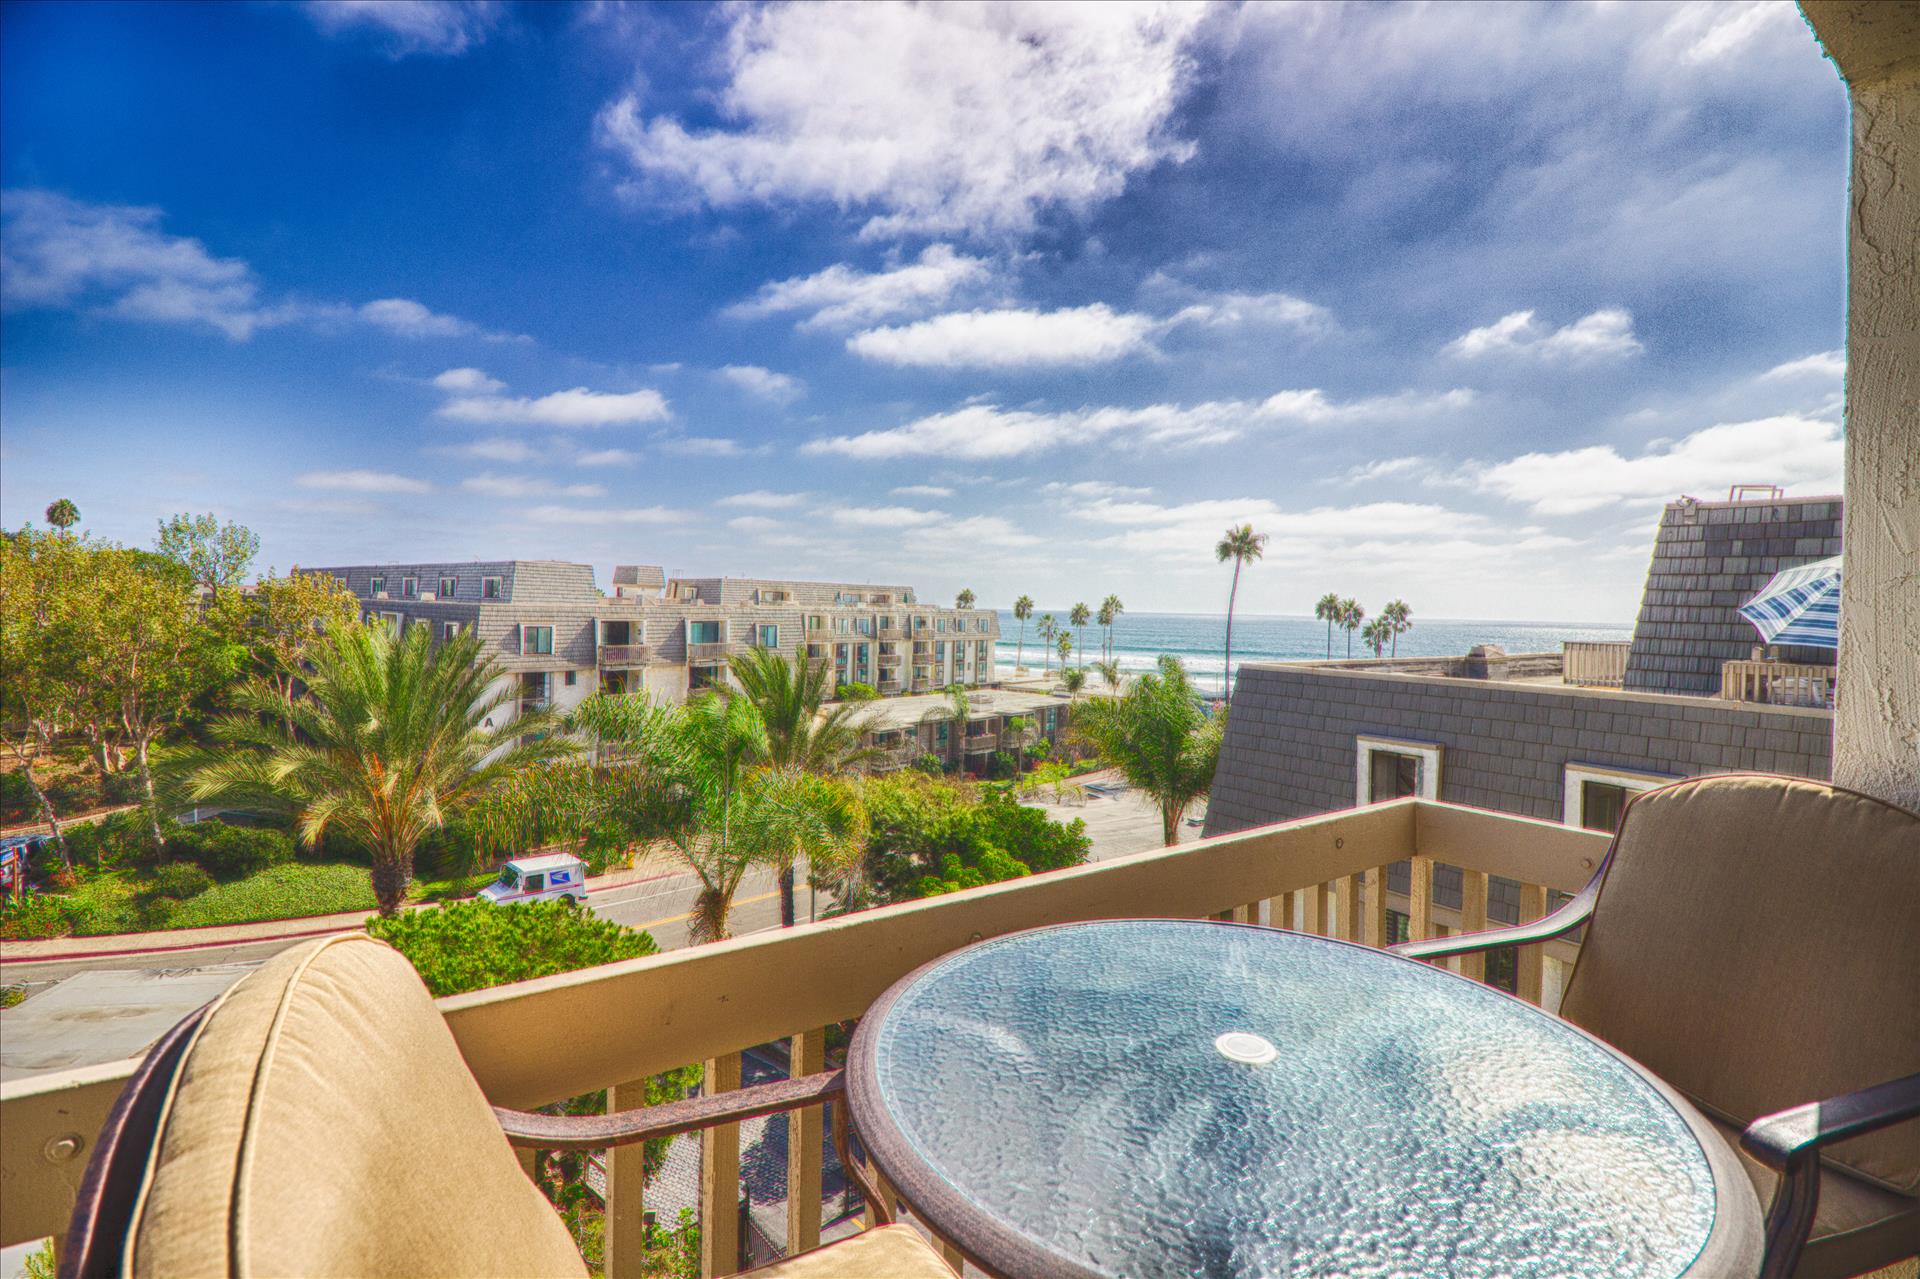 JUST LISTED! 999 N. PACIFIC ST. B326 @ Oceanside 